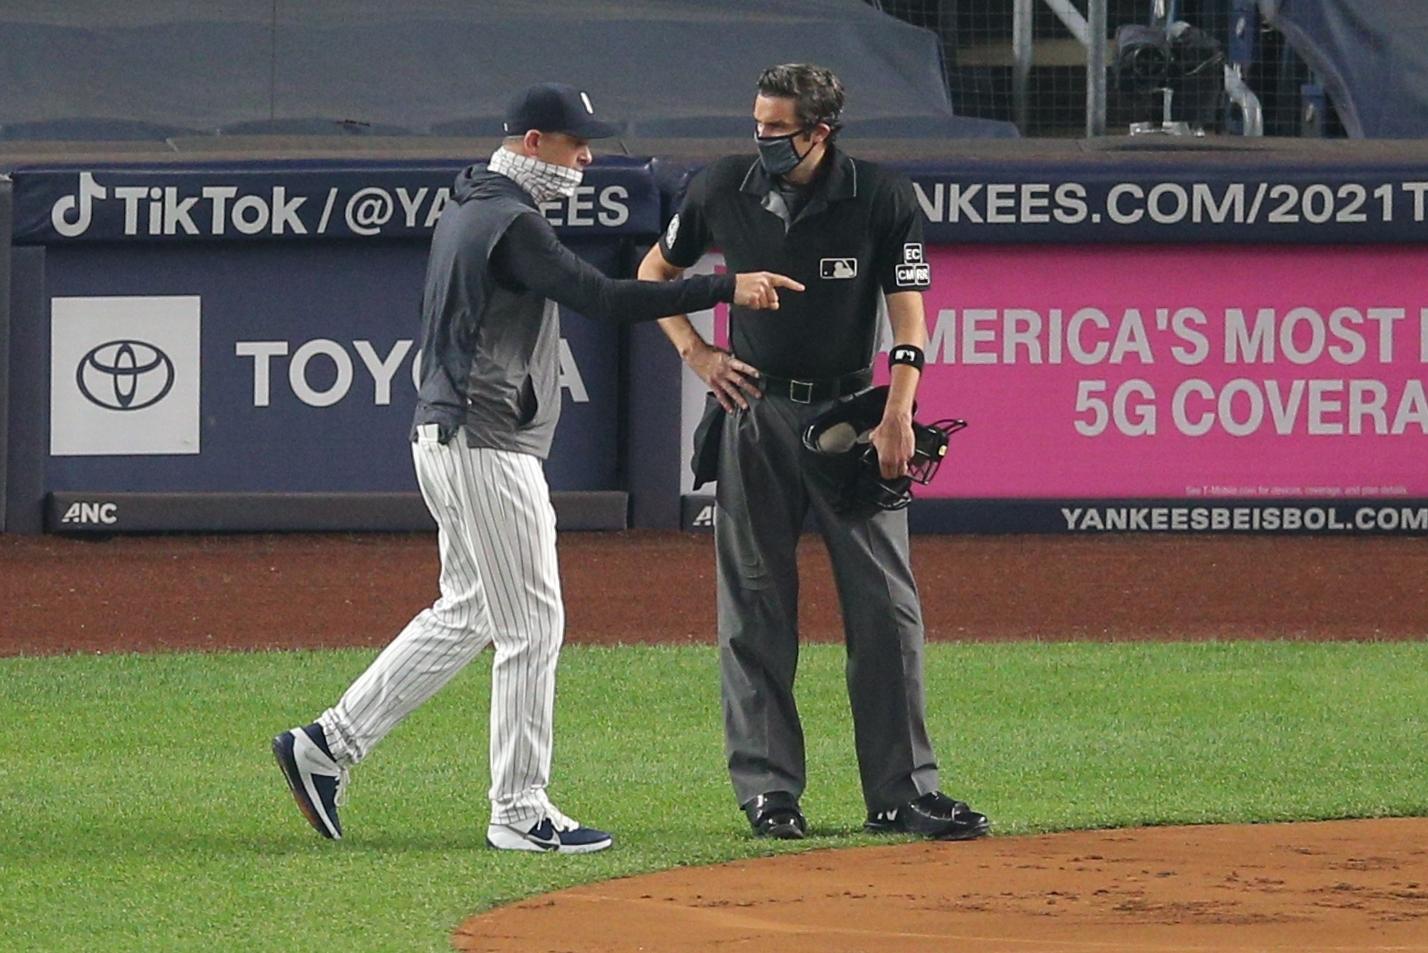 Sep 25, 2020; Bronx, New York, USA; New York Yankees manager Aaron Boone argues with home plate umpire John Tumpane (74) during the first inning against the Miami Marlins at Yankee Stadium. Mandatory Credit: Brad Penner-USA TODAY Sports / © Brad Penner-USA TODAY Sports